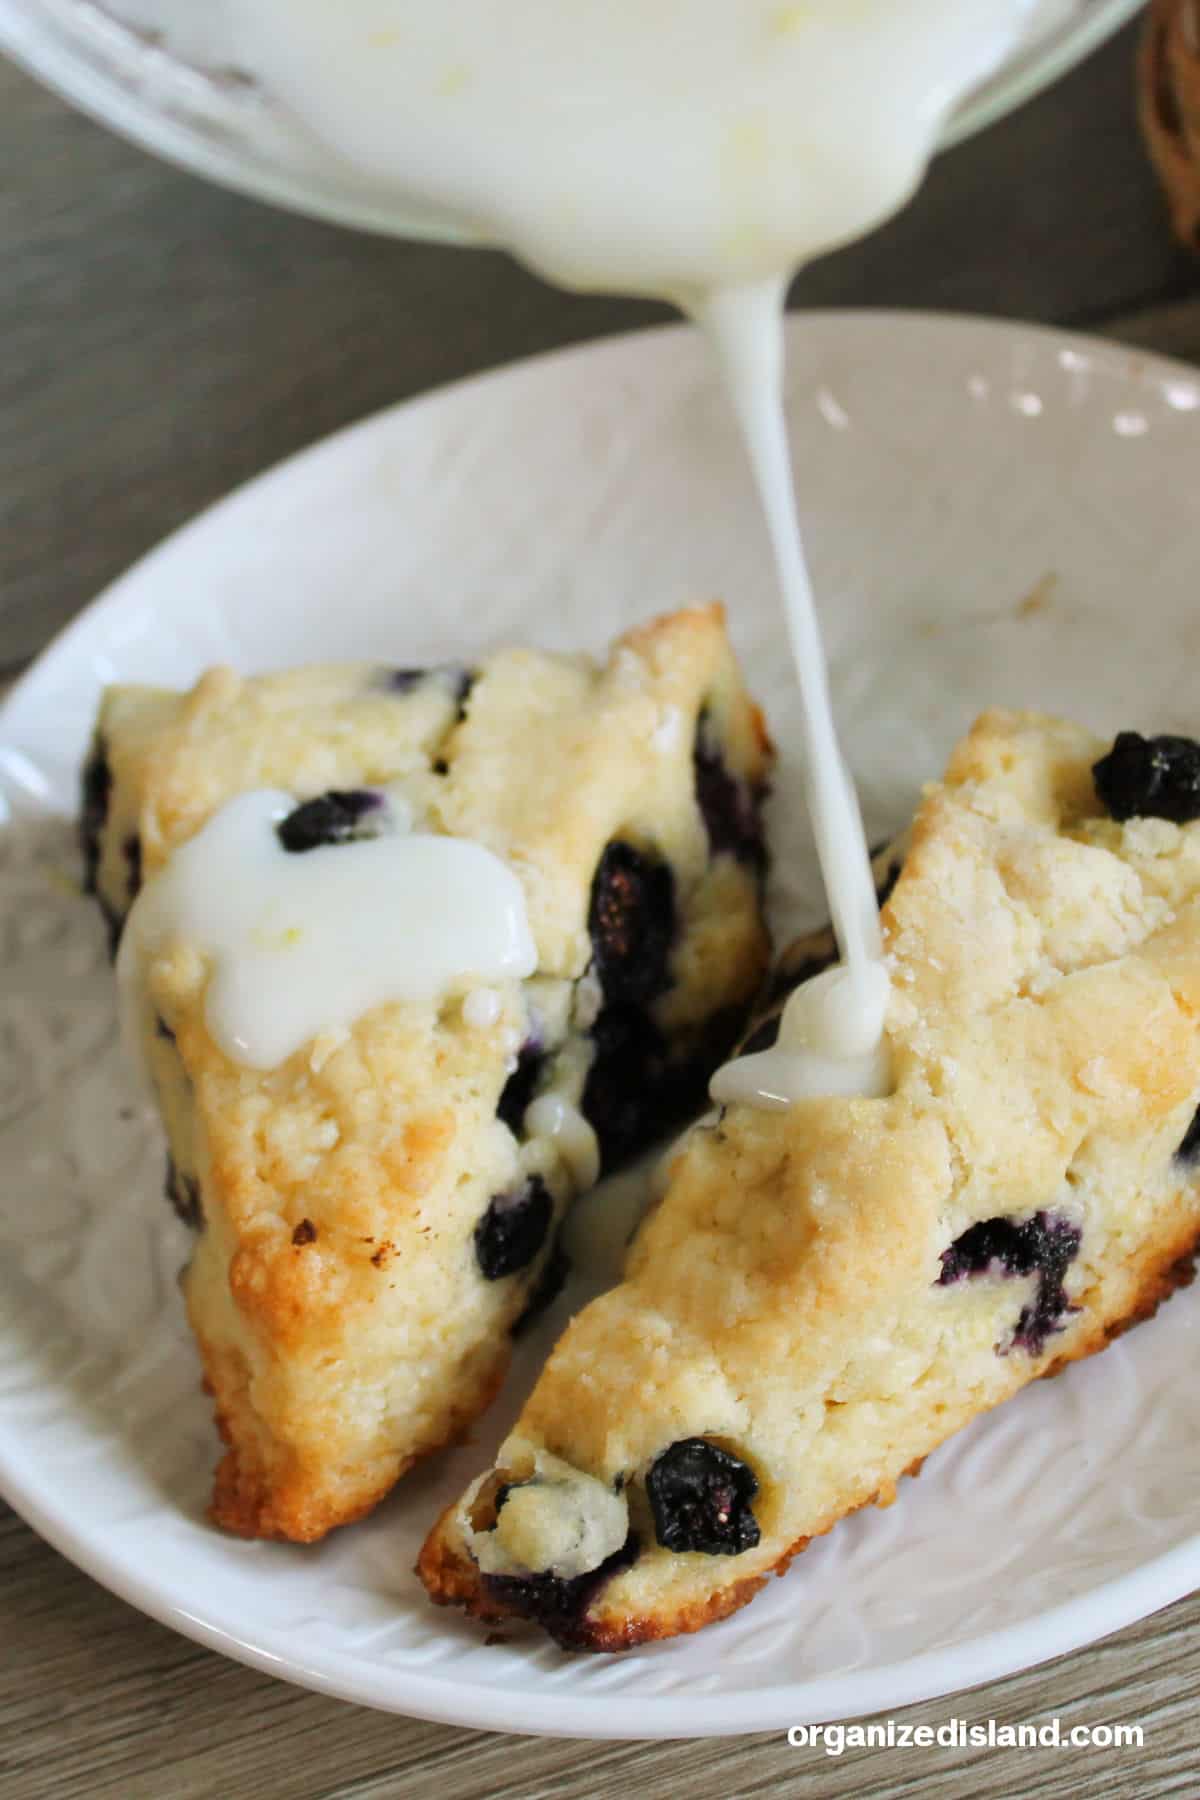 Blueberry scones drizzled with icing.